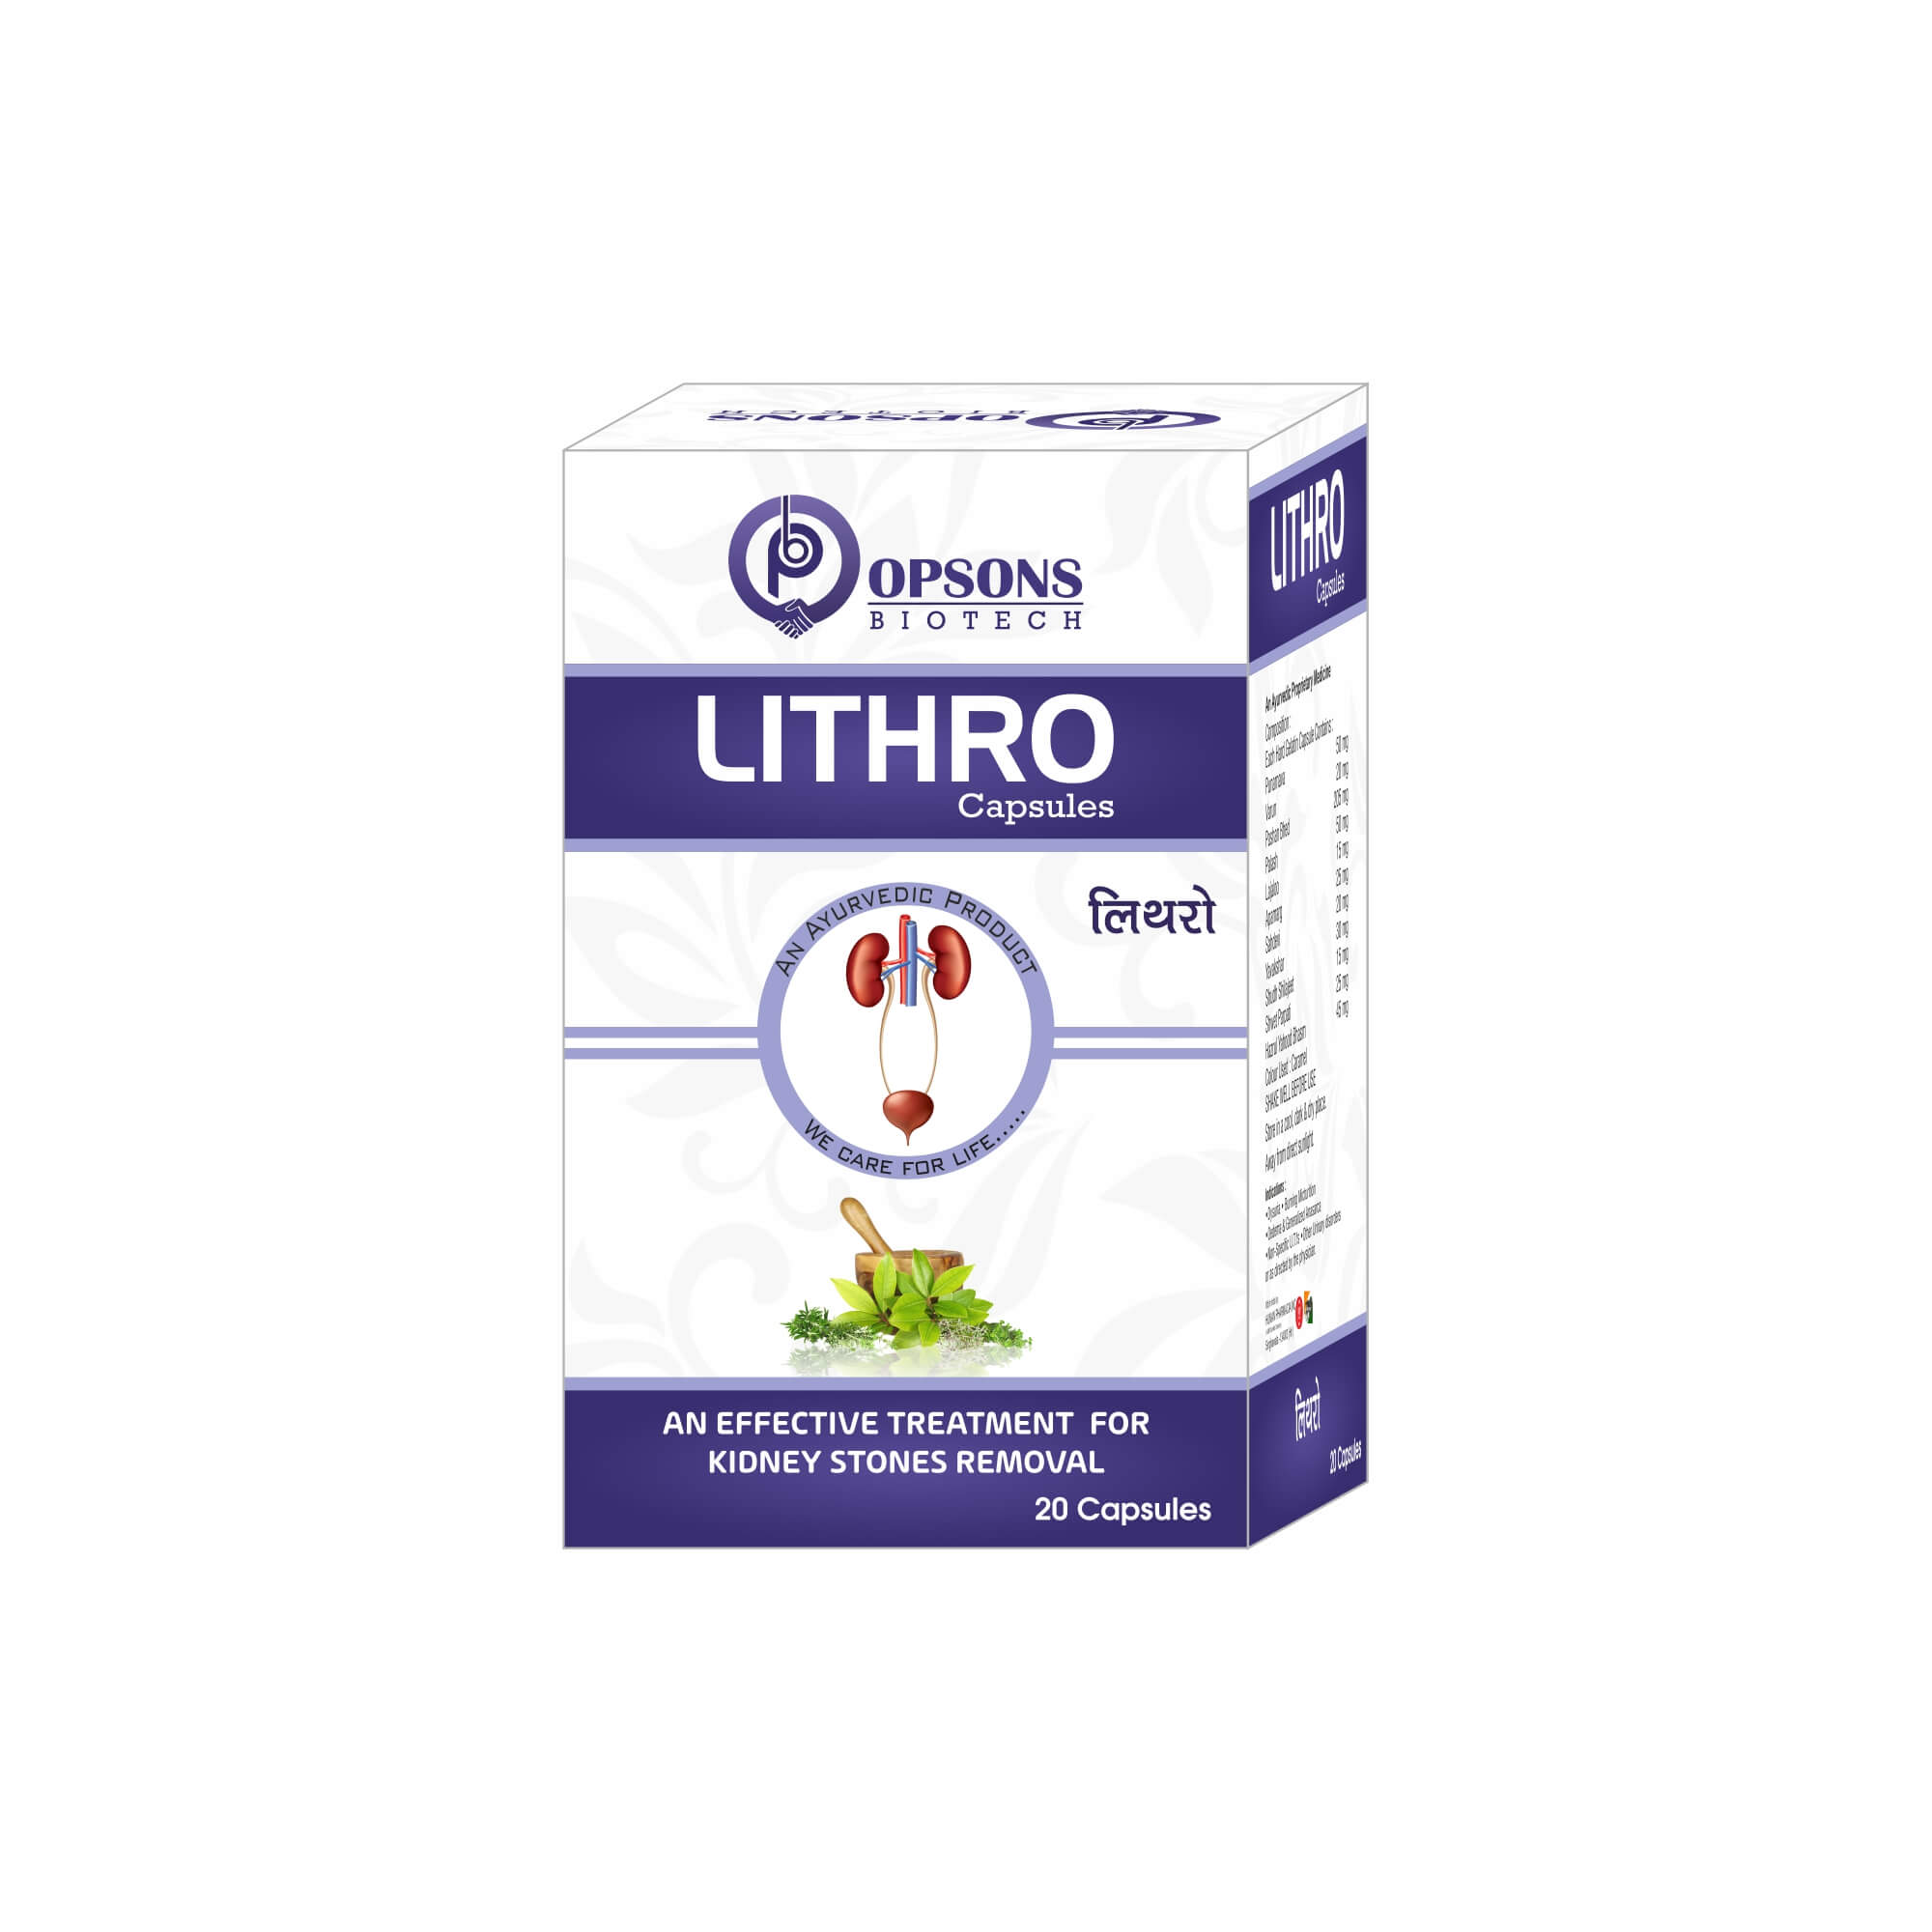 Product Name: Lithro Capsules, Compositions of Lithro Capsules are An Effective Treatment For Kidney Stones Removal - Opsons Biotech